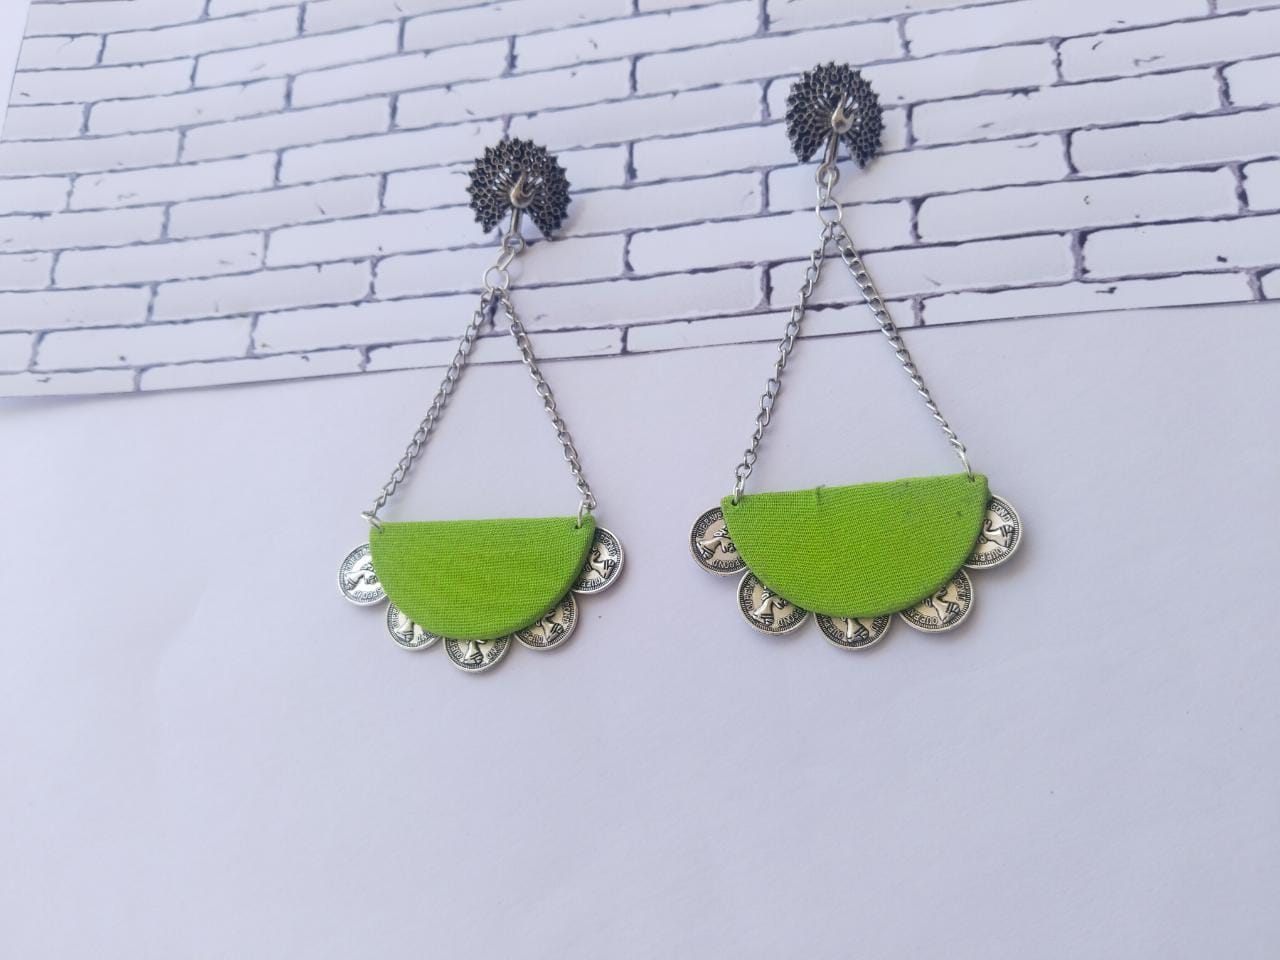 Light green and silver chain earrings with silver coins details at bottom on white backdrop